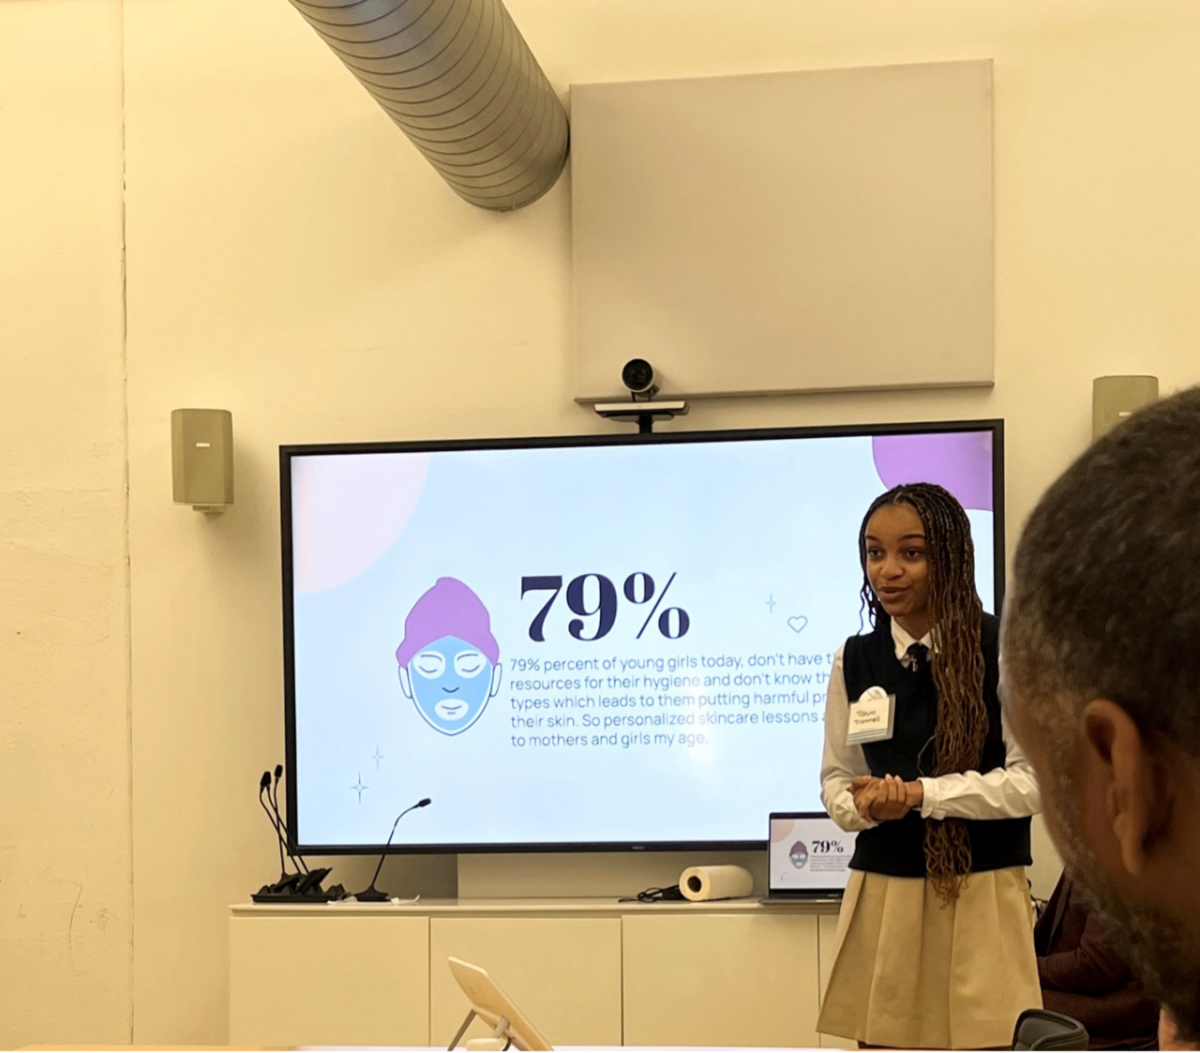 A female middle school student stands in front of a screen and presents information to a group. The screen shows an illustrated woman with her hair wrapped in a towel and a face mask.